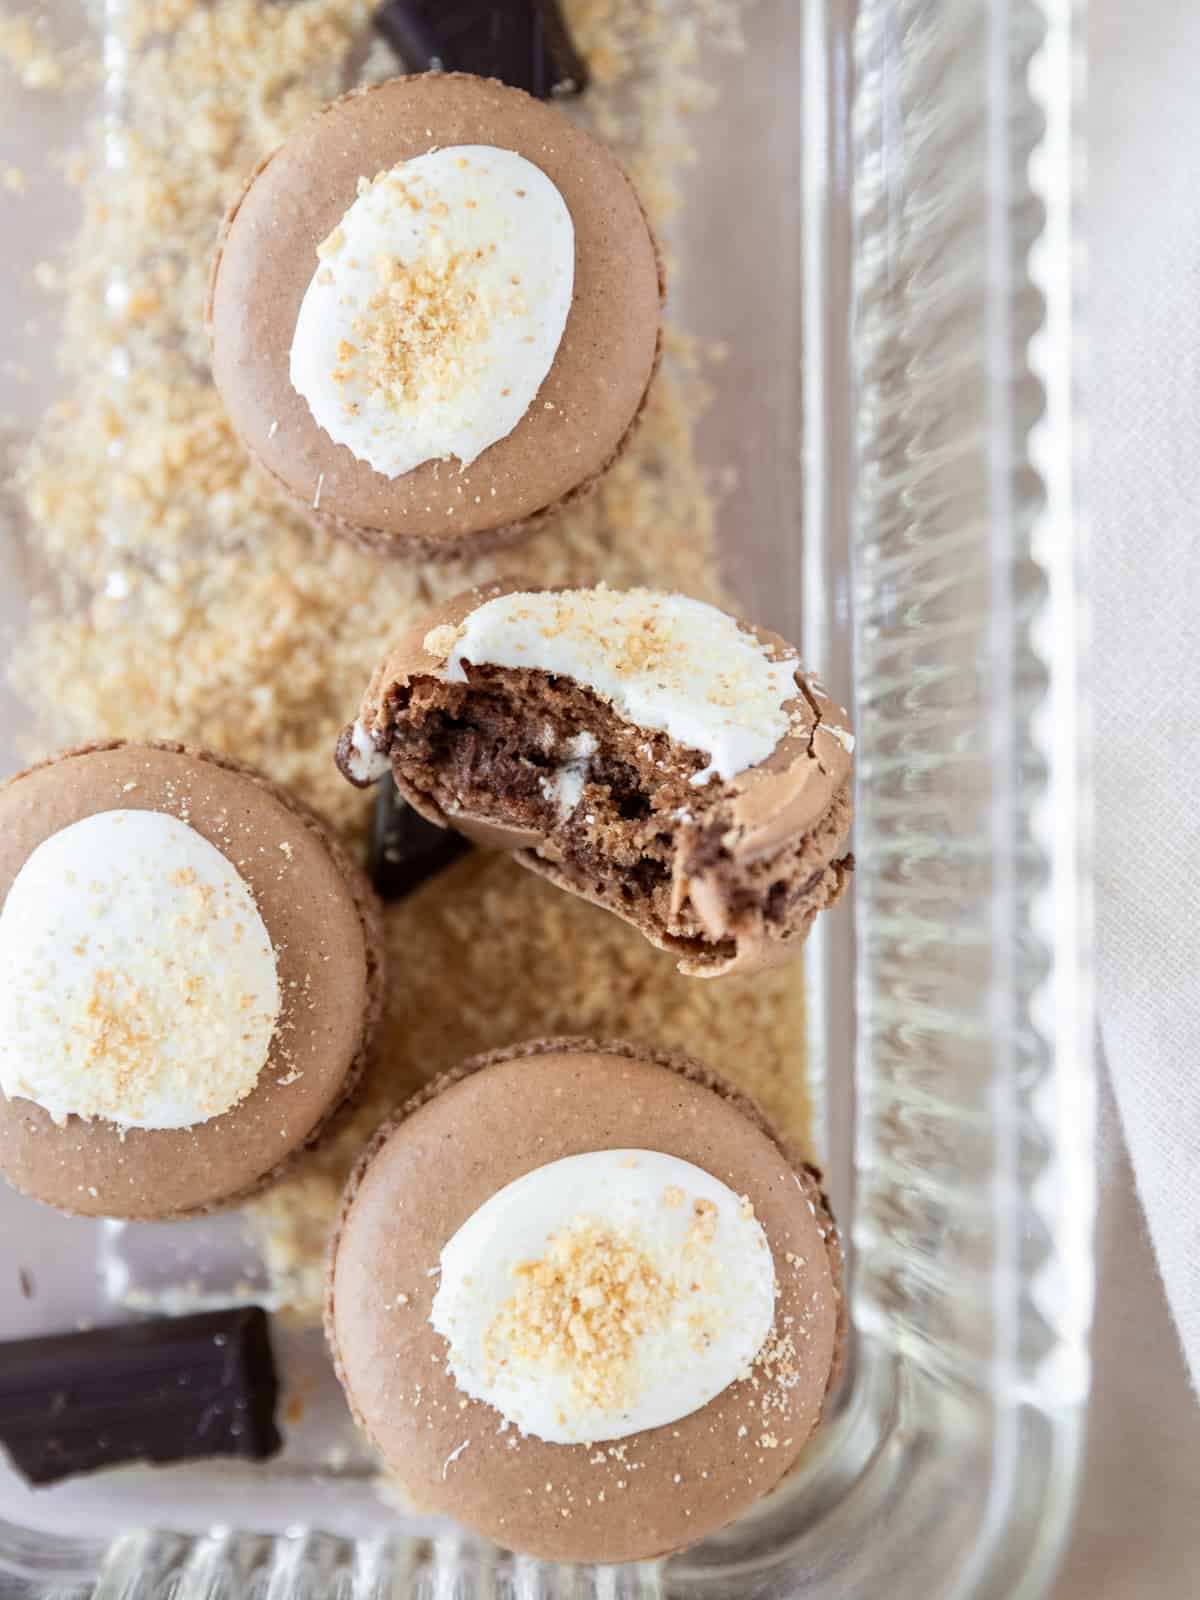 a smore macaron with a bite out of it surrounded by other macarons, chocolate, and graham cracker crumbs.